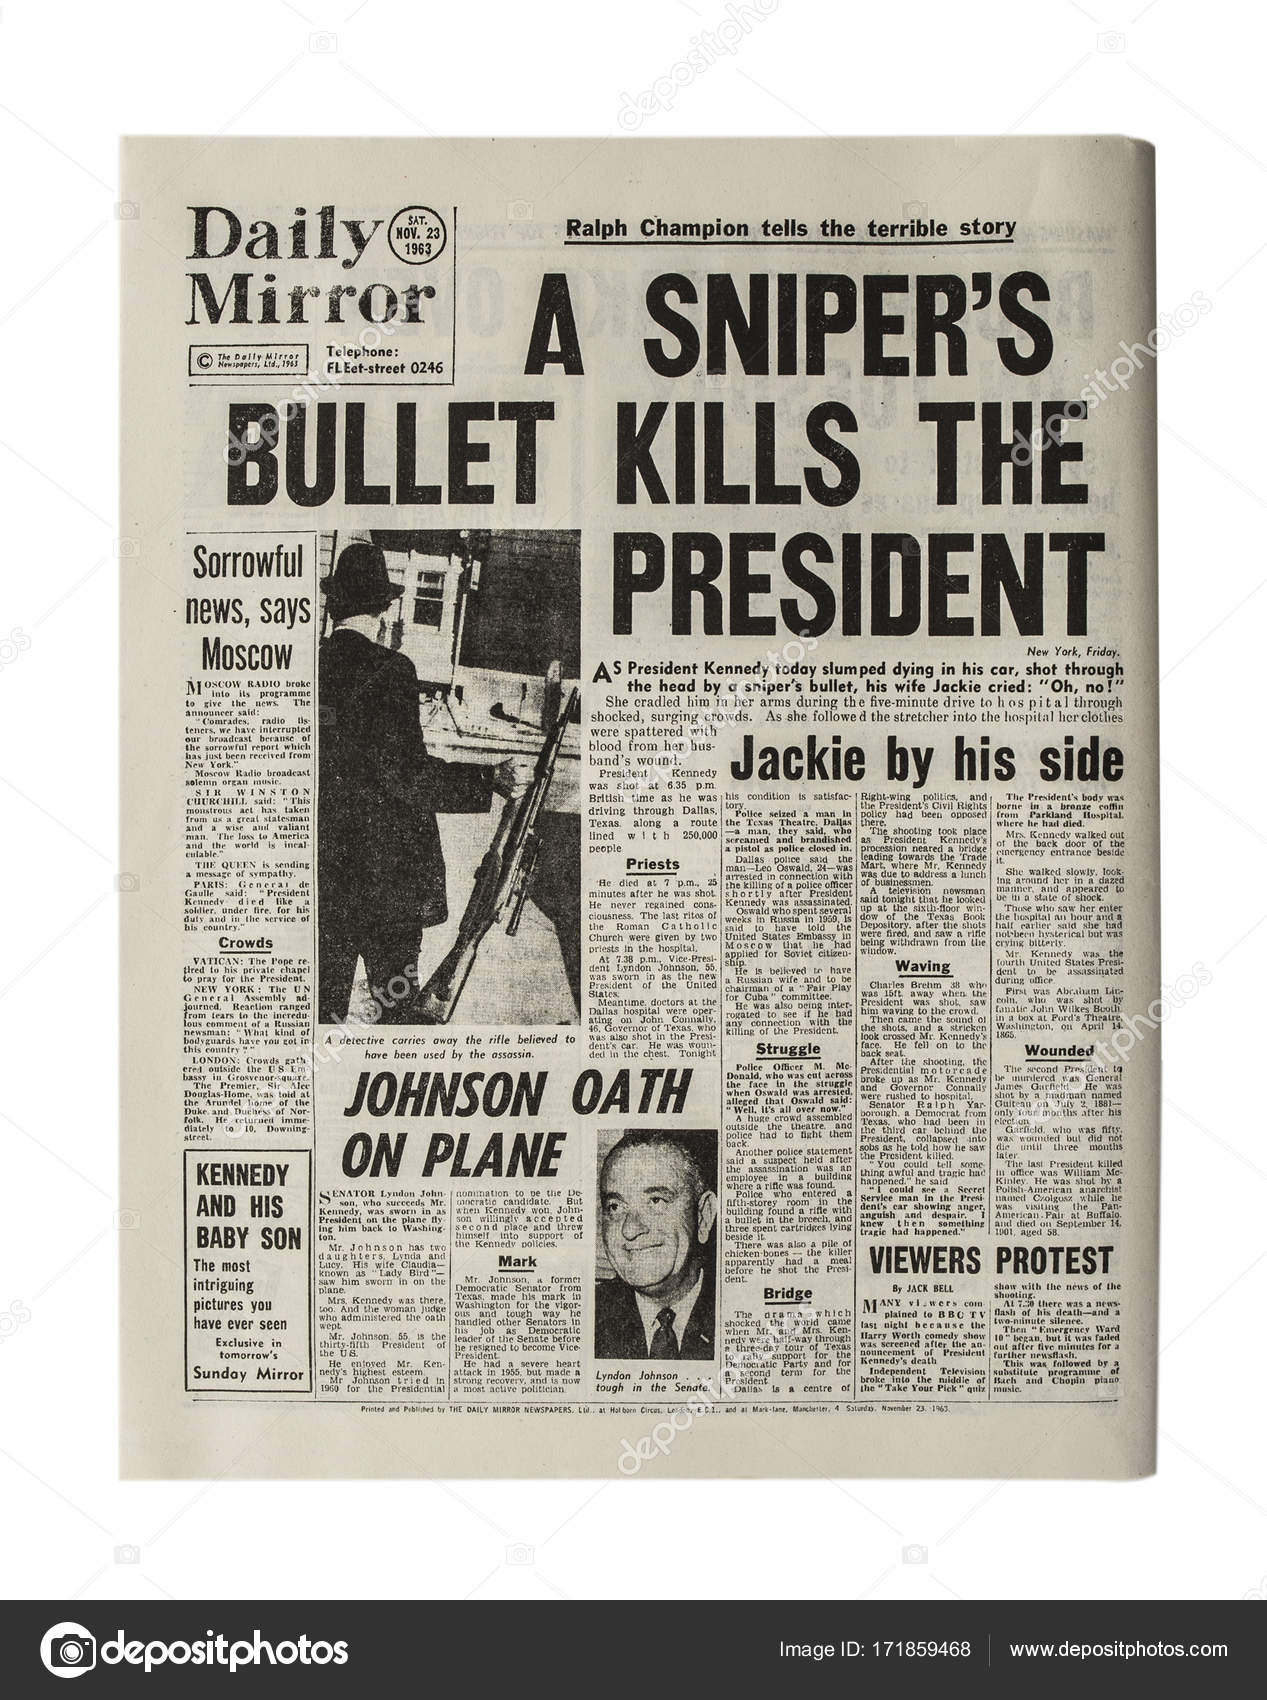 Humanistisk Henstilling Ulydighed Daily Mirror Newspaper Sat Nov 23 1963 President Kennedy Killed by a  Snipers Bullet – Stock Editorial Photo © urbanbuzz #171859468